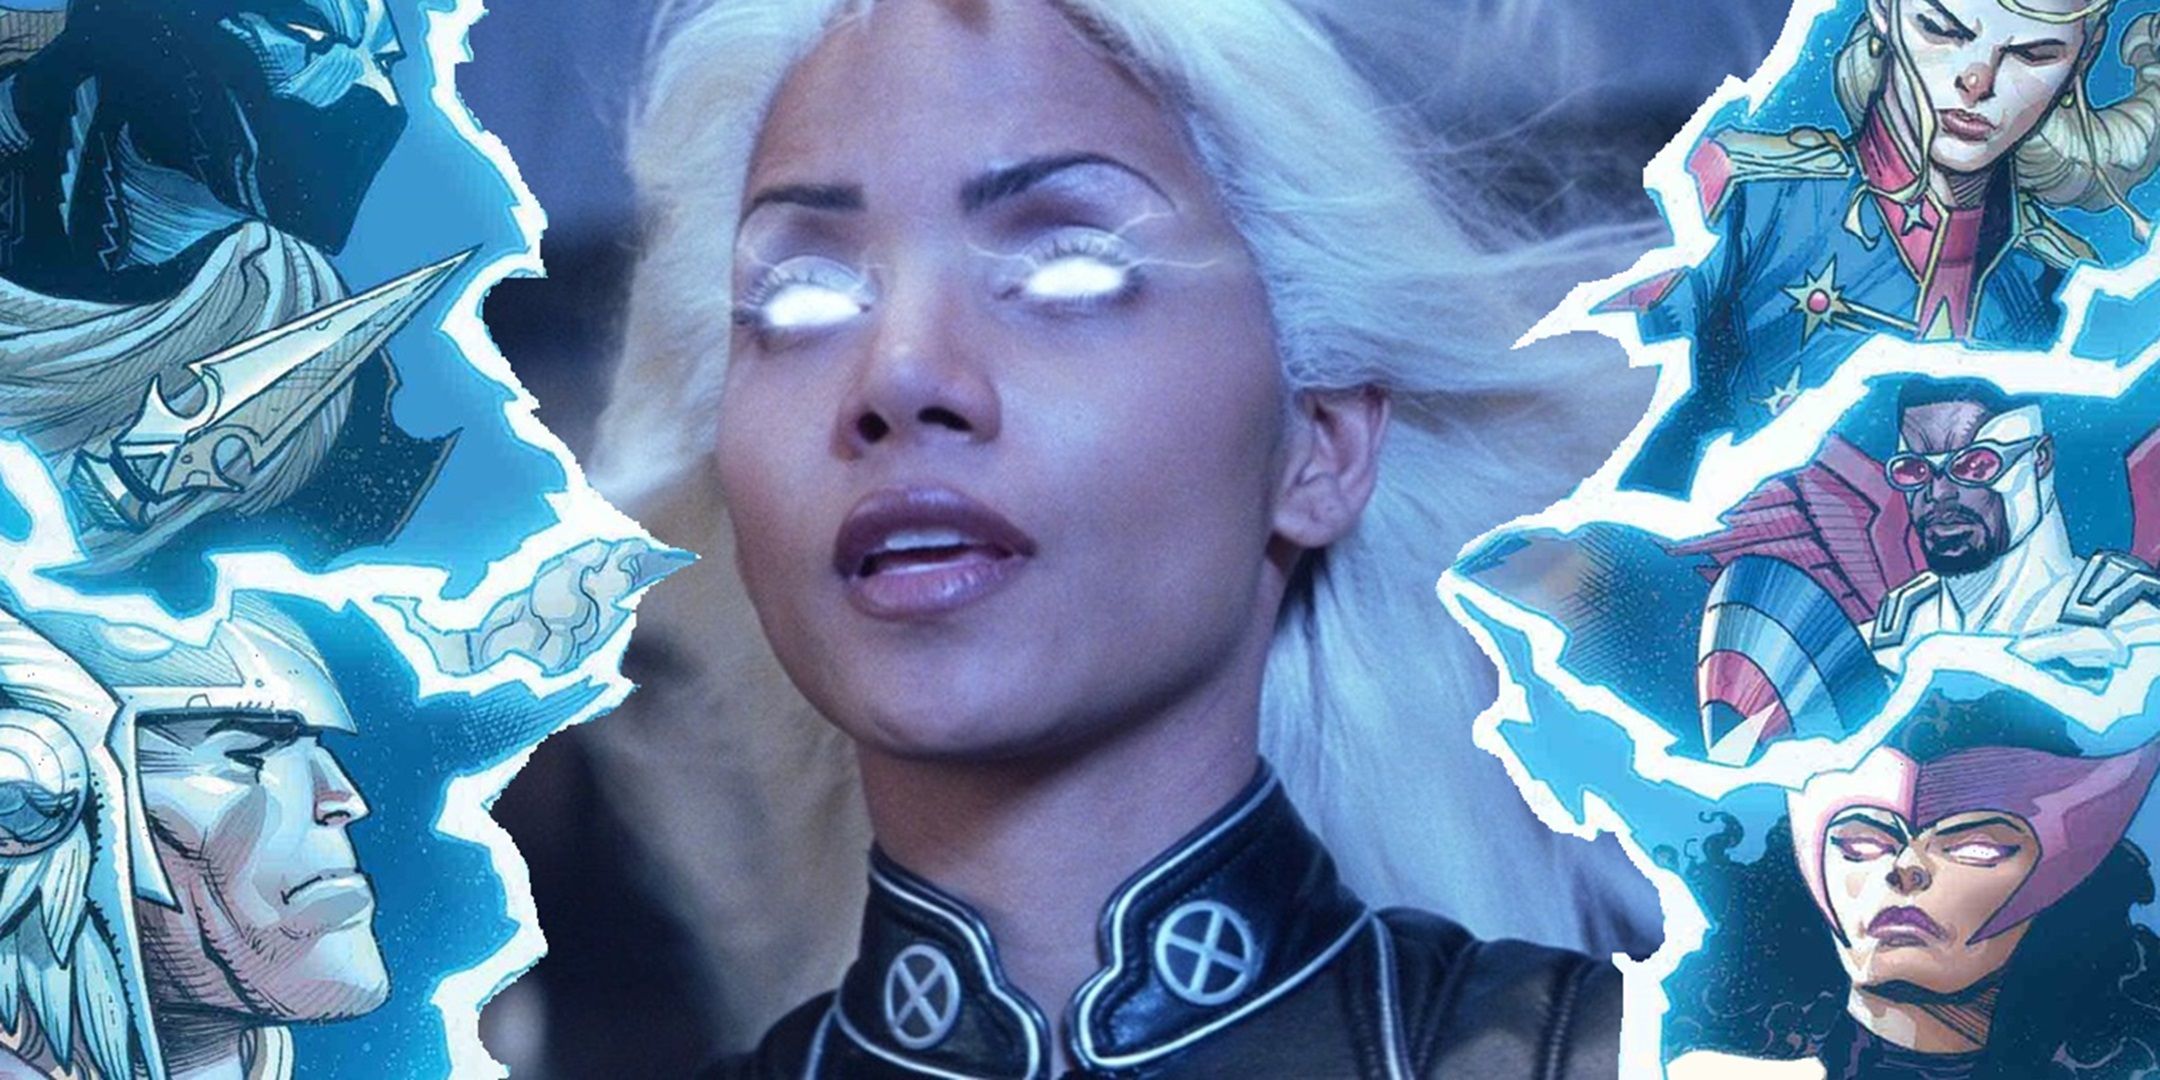 Storm joins the Avengers